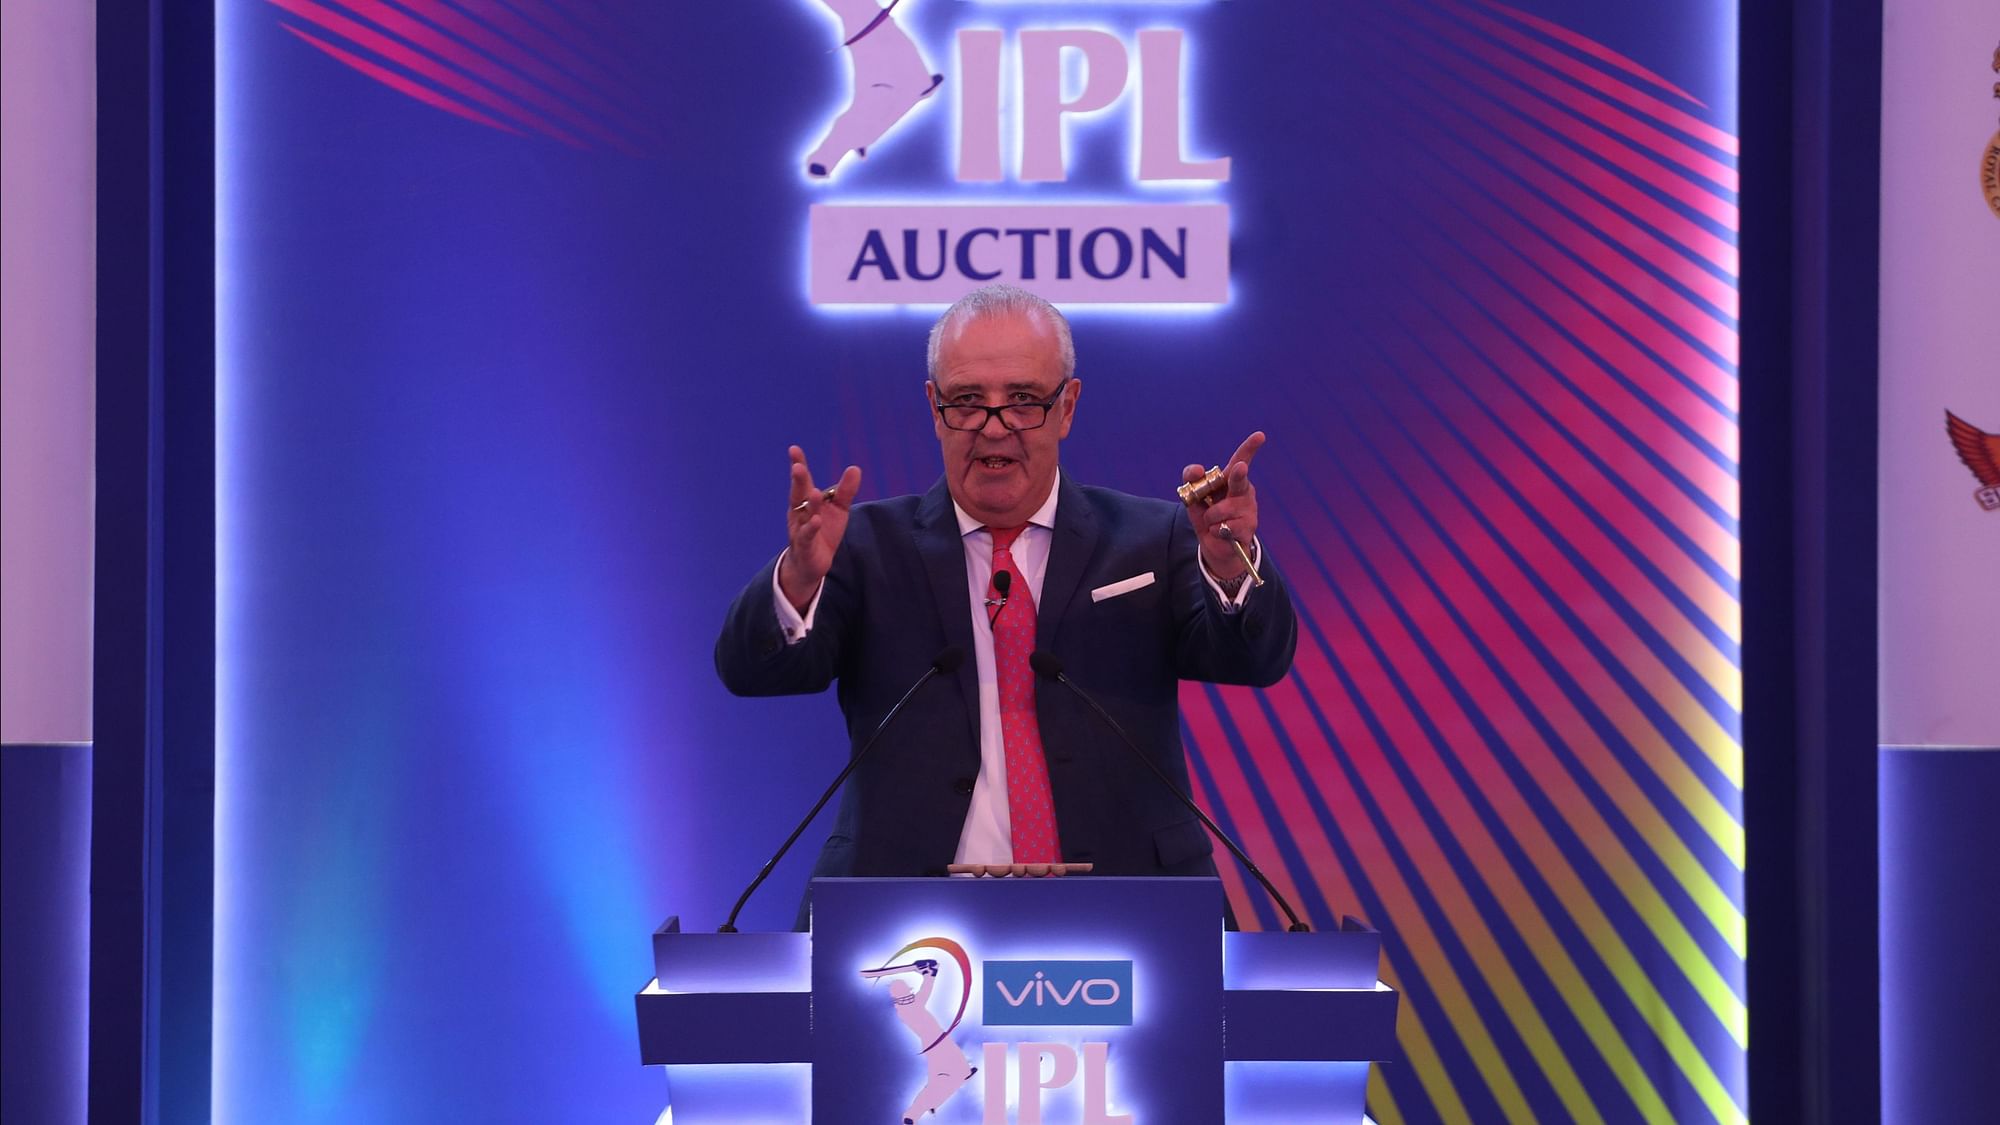 The Vivo IPL 2020 auction list carries some heavy names who could start a bidding war amongst the owners.